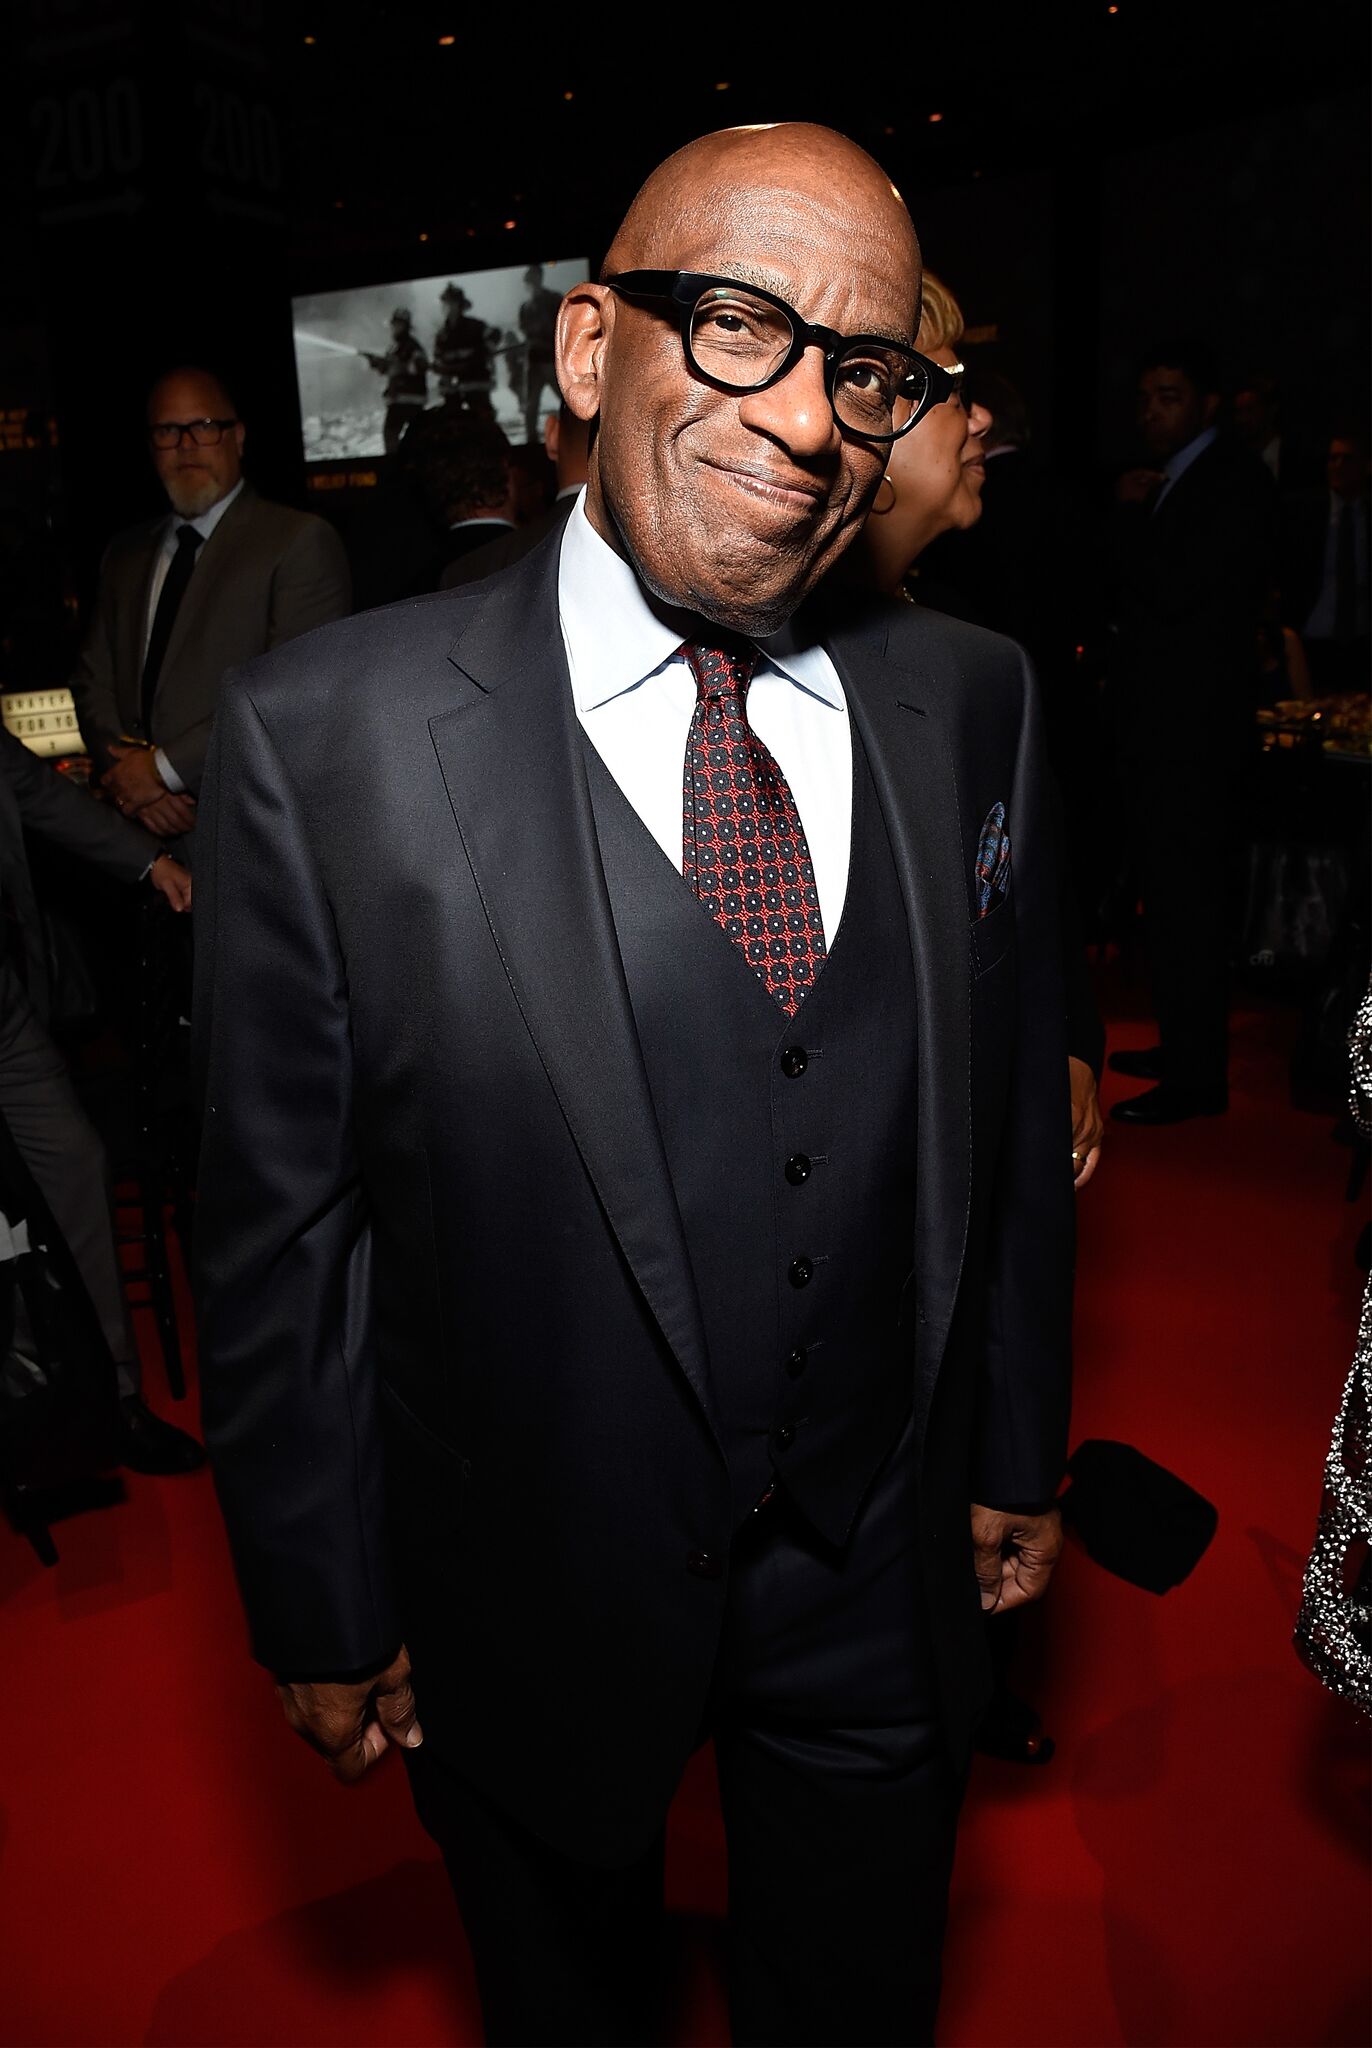  Al Roker attends The Robin Hood Foundation's 2018 benefit at Jacob Javitz Center | Getty Images